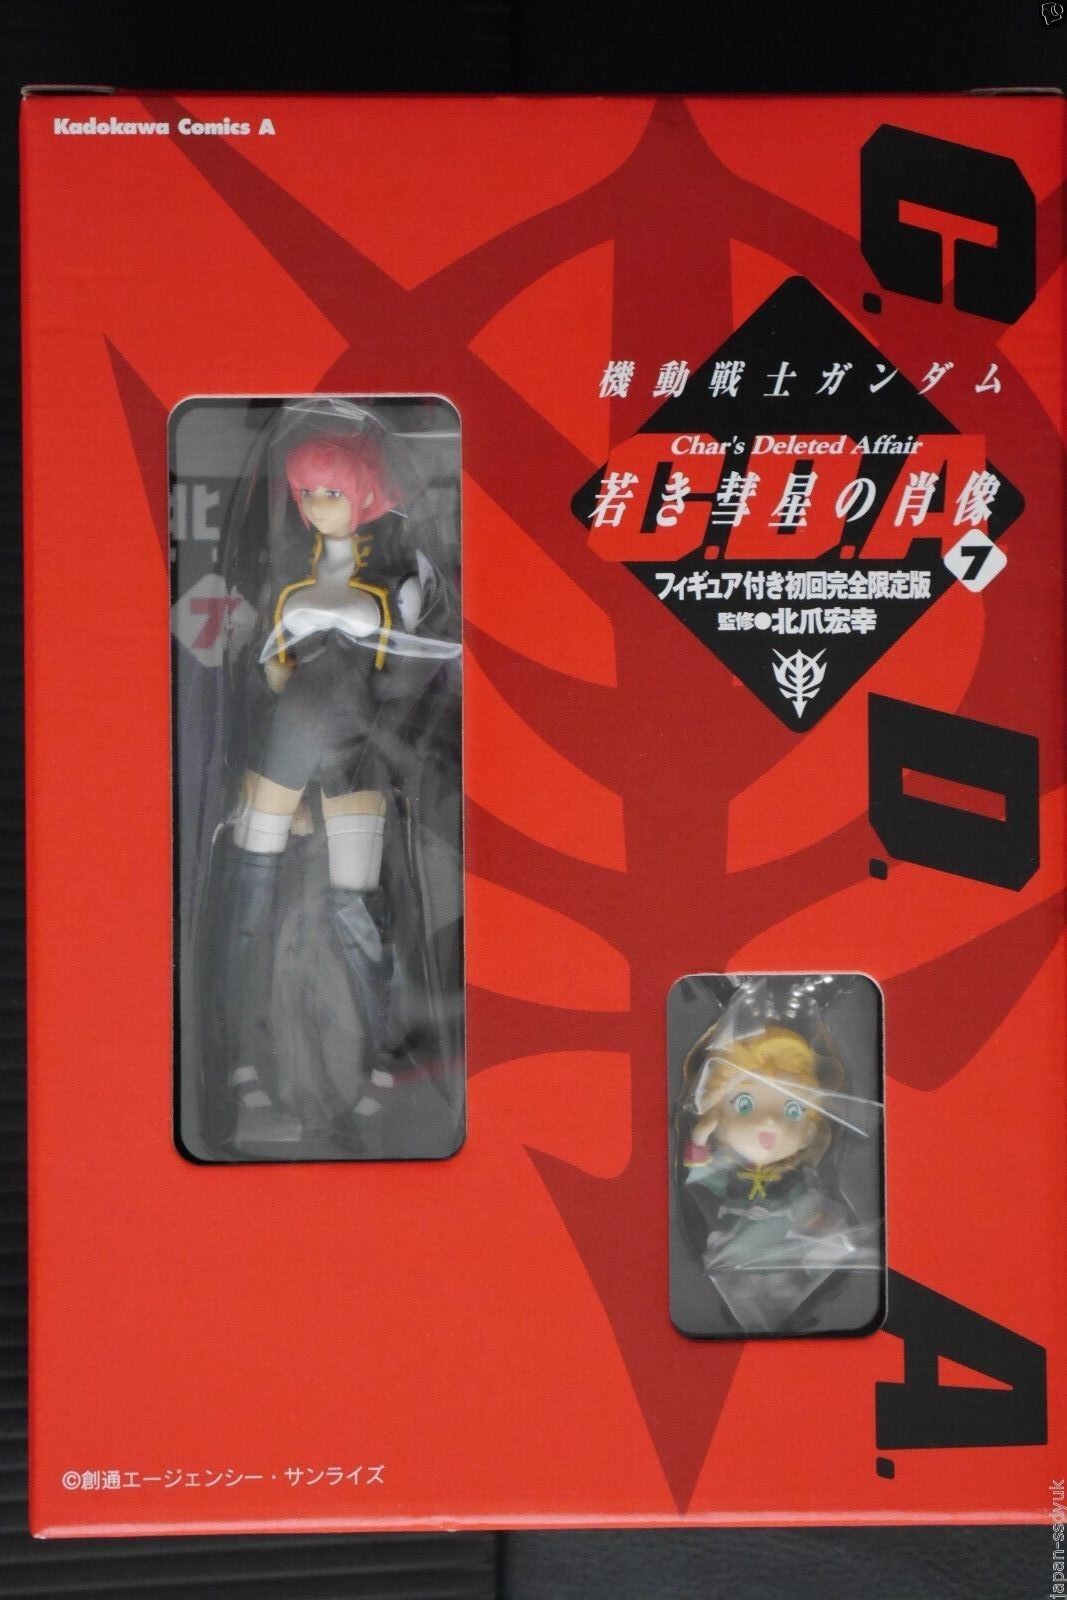 JAPAN manga: Mobile Suit Gundam Char's Deleted Affair 7 Limited Edition